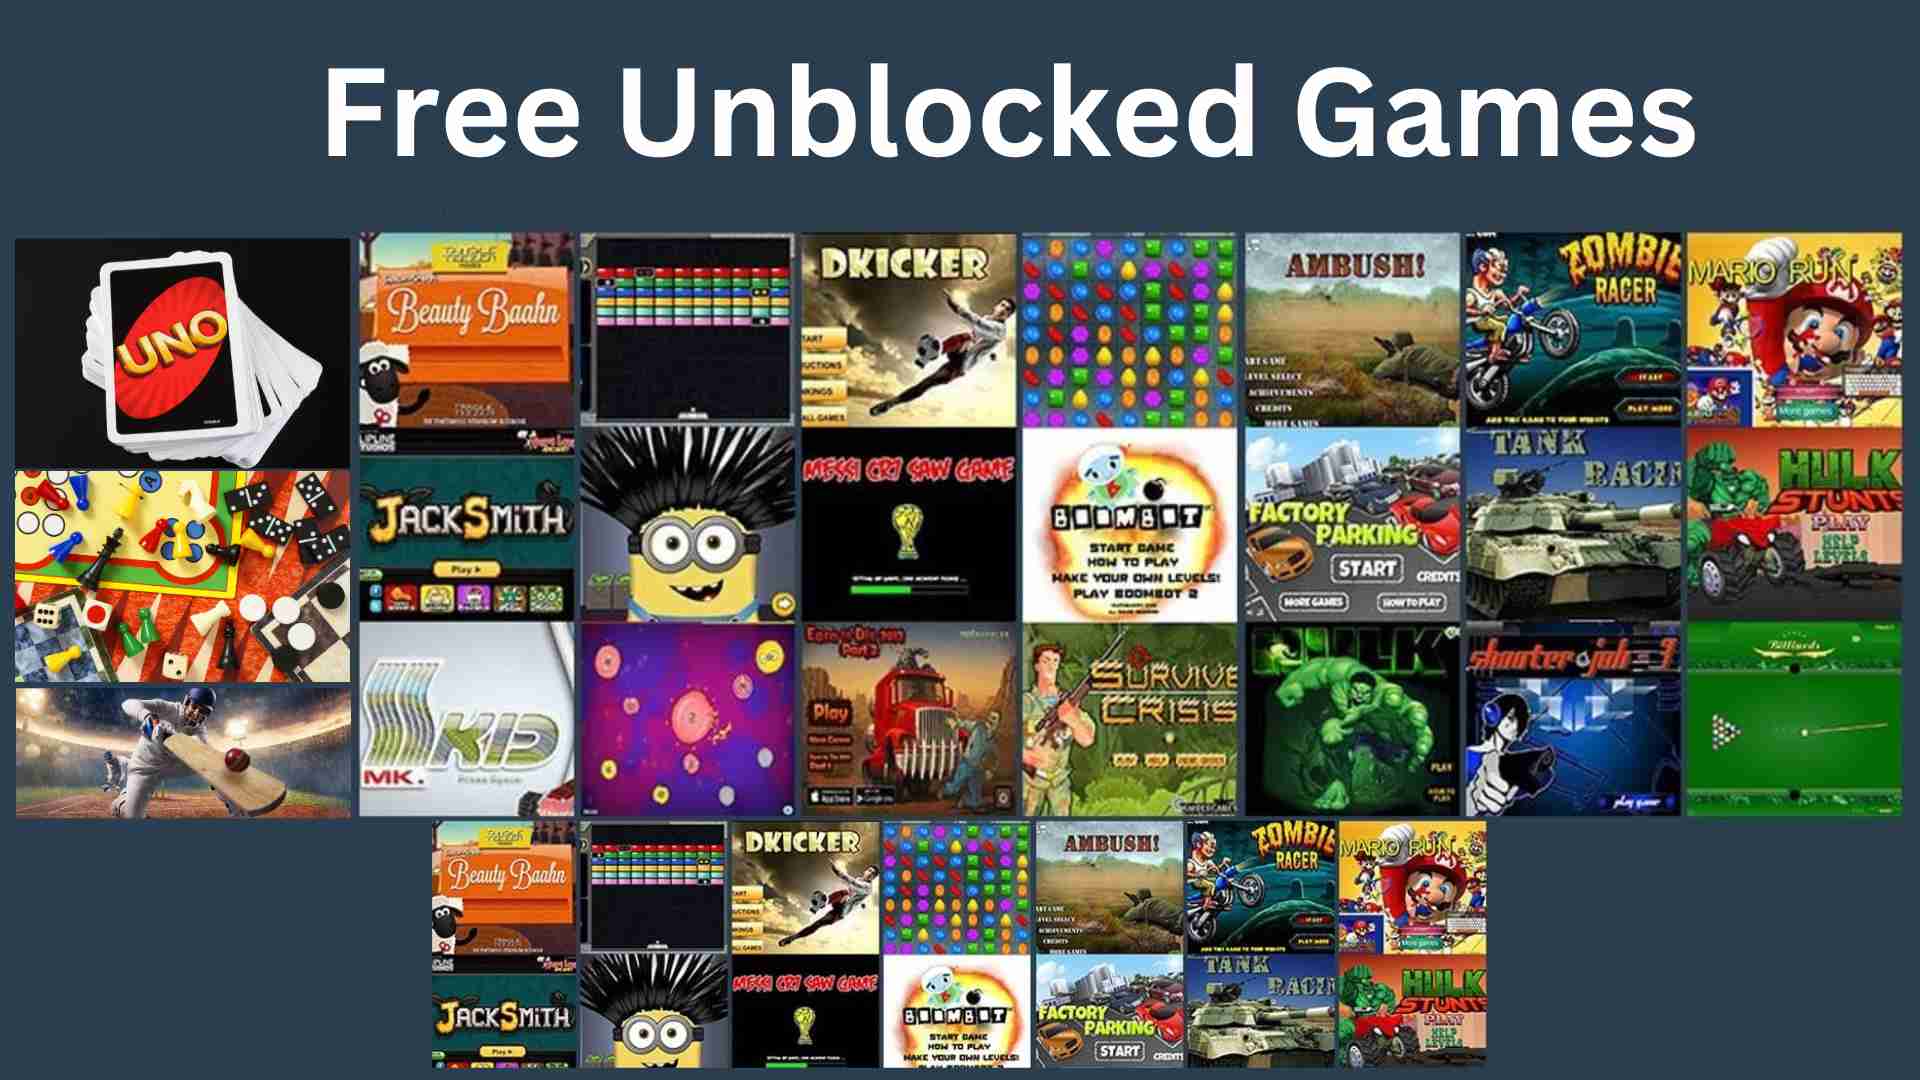 Play free Unblocked Games